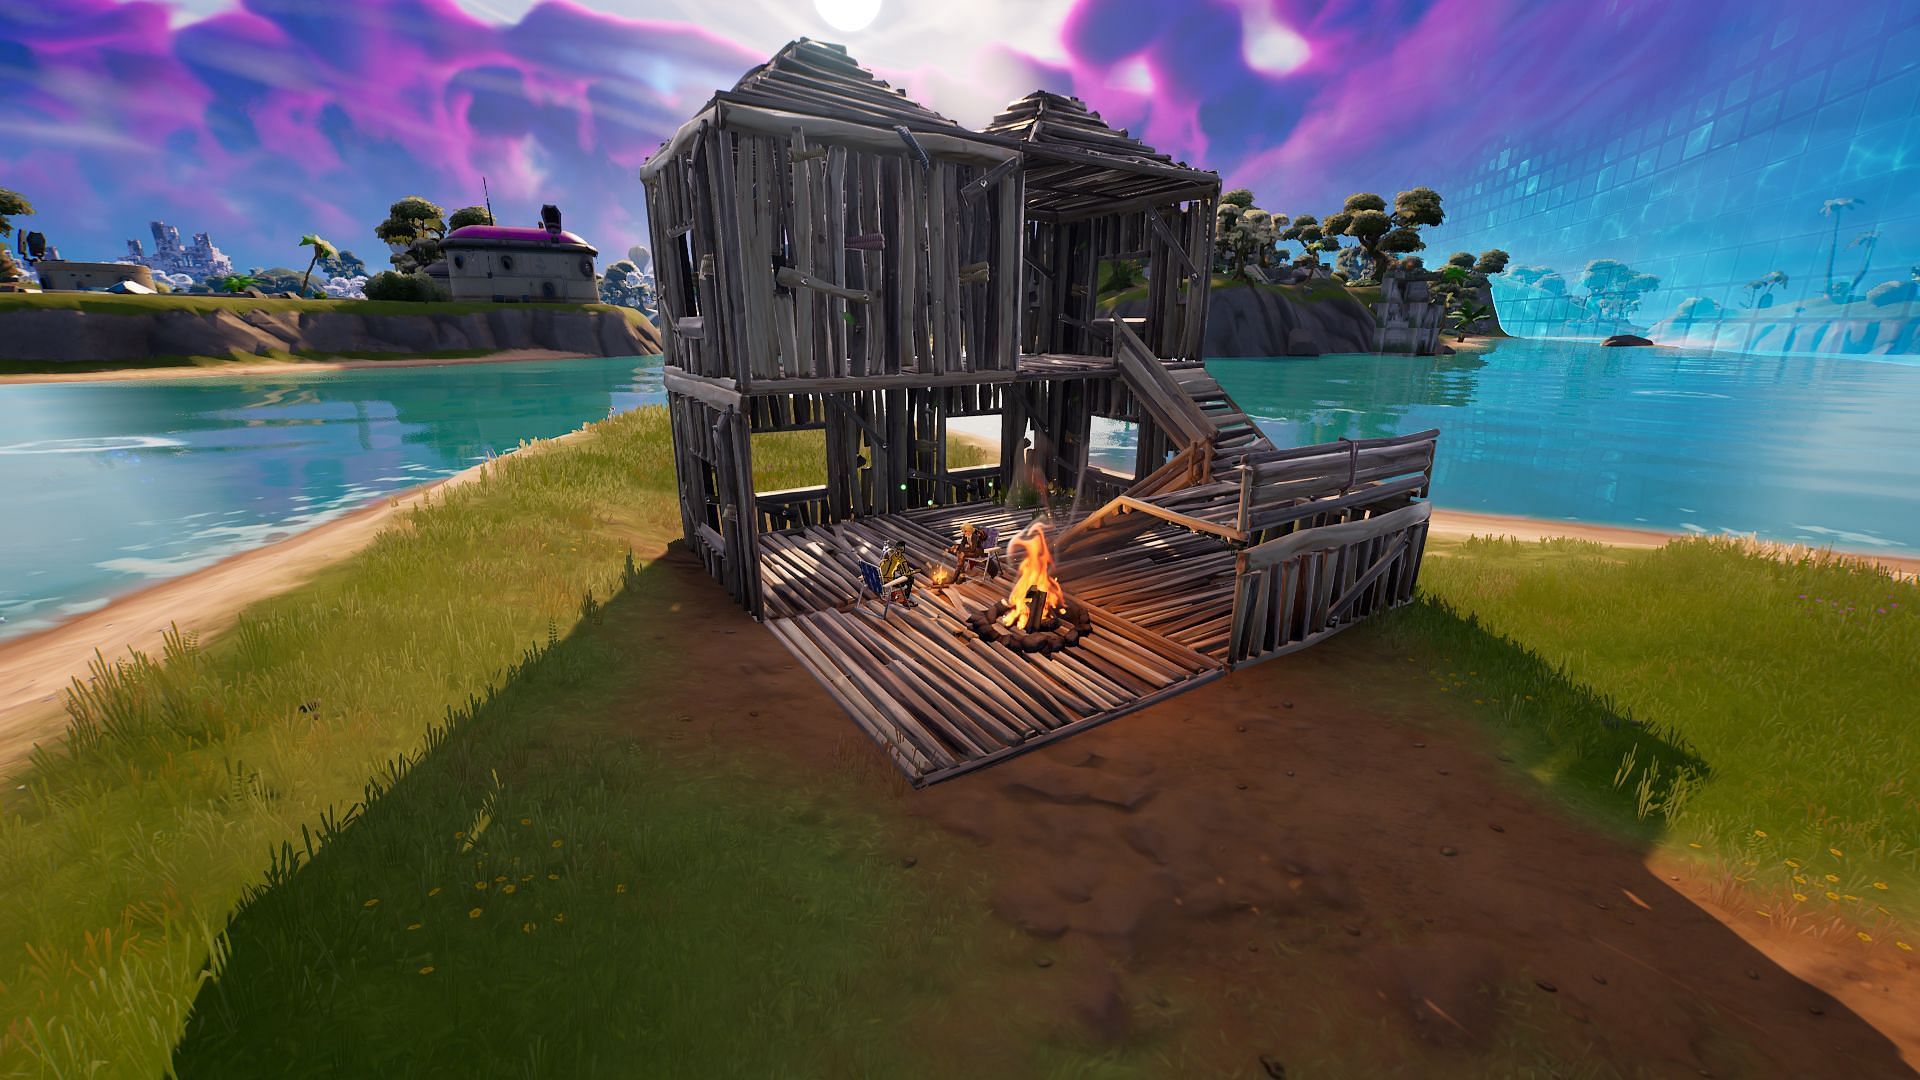 Although building in Fortnite has been massively nerfed, it